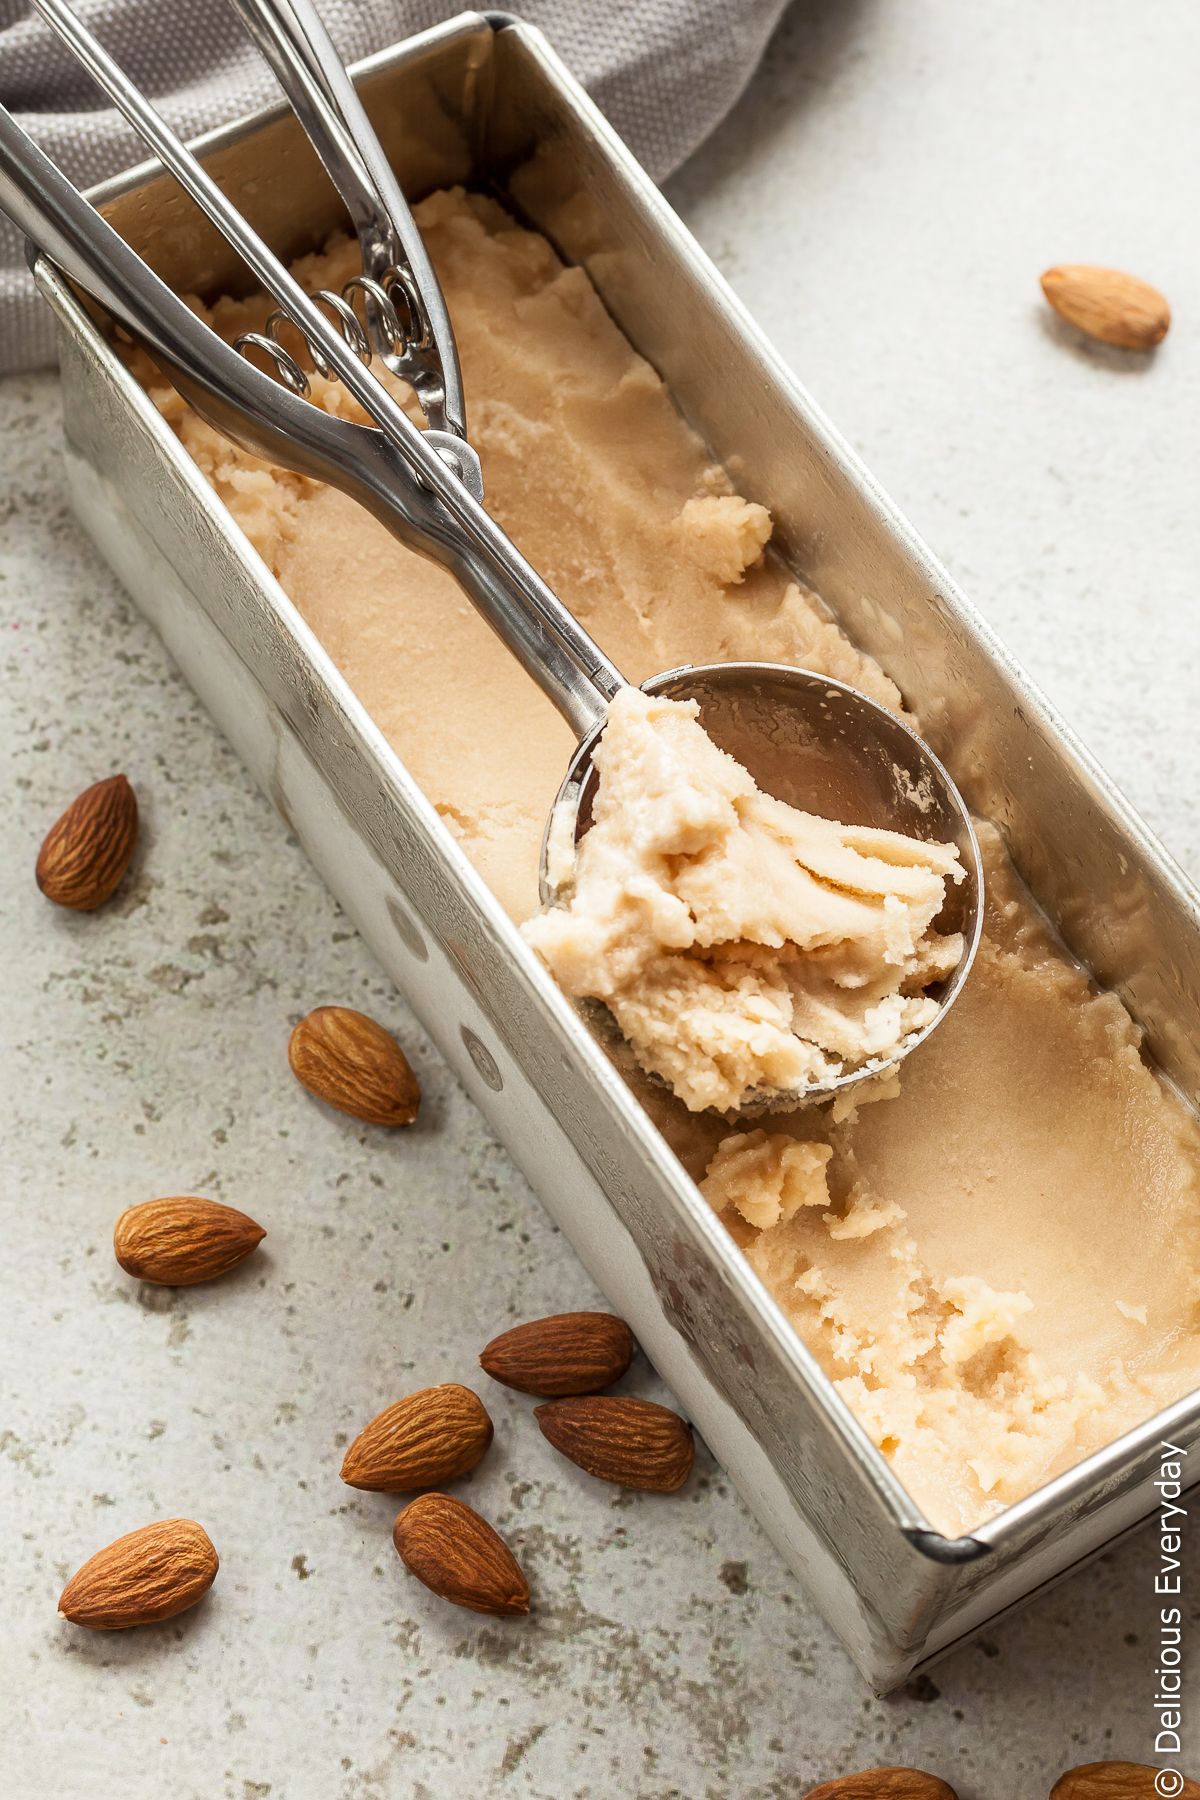 With a deep nutty, bordering on coffee/chocolate flavour, this Toasted Almond Milk Sorbet will be one you'll make again and again!